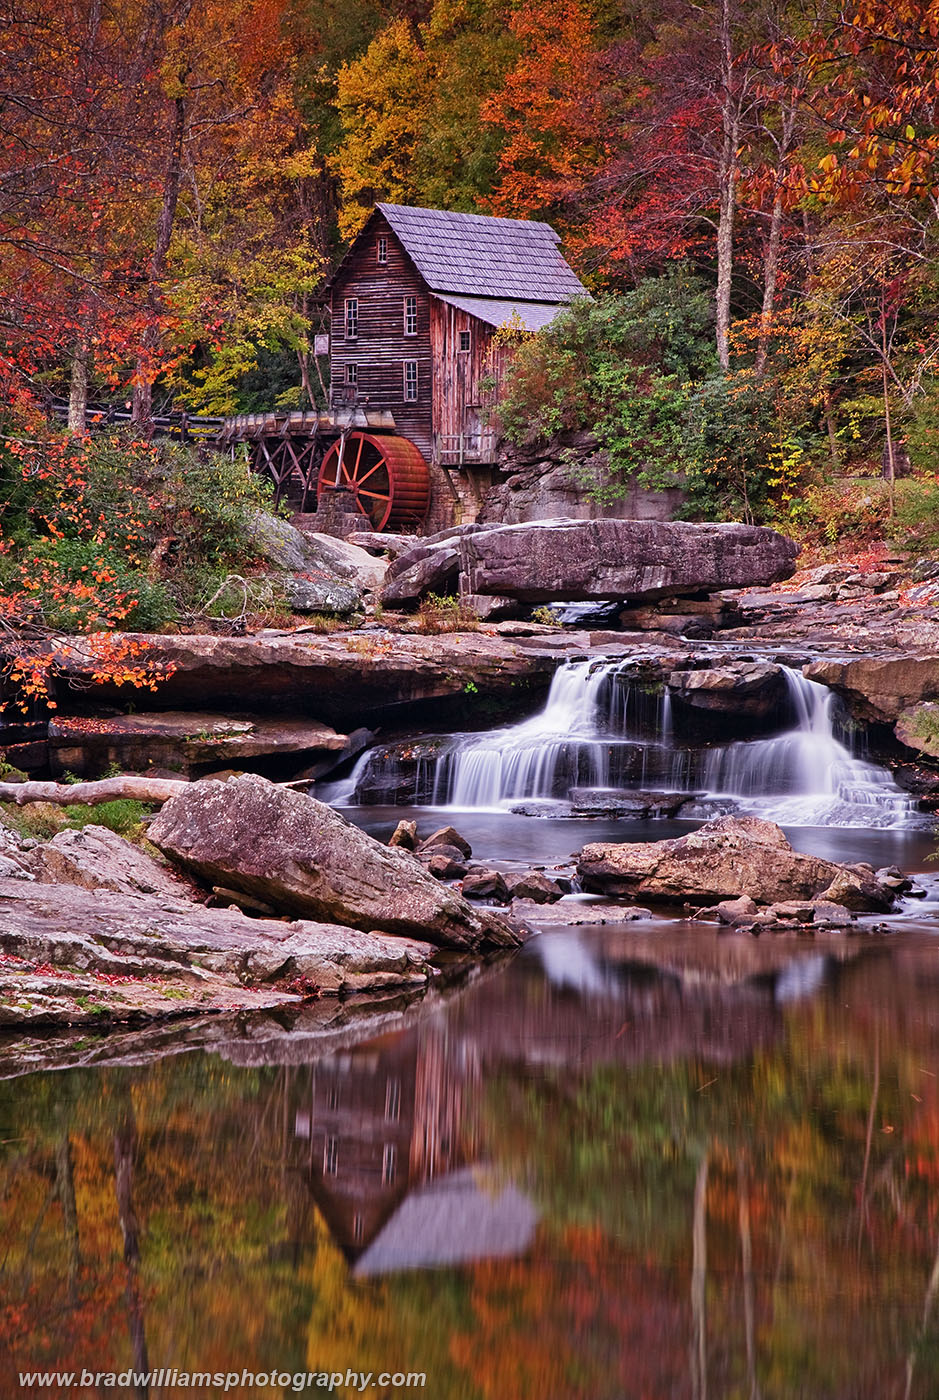 The Glade Creek Grist Mill is a "New" mill made up of parts from three other historic&nbsp;mills in West Virginia. &nbsp;The...